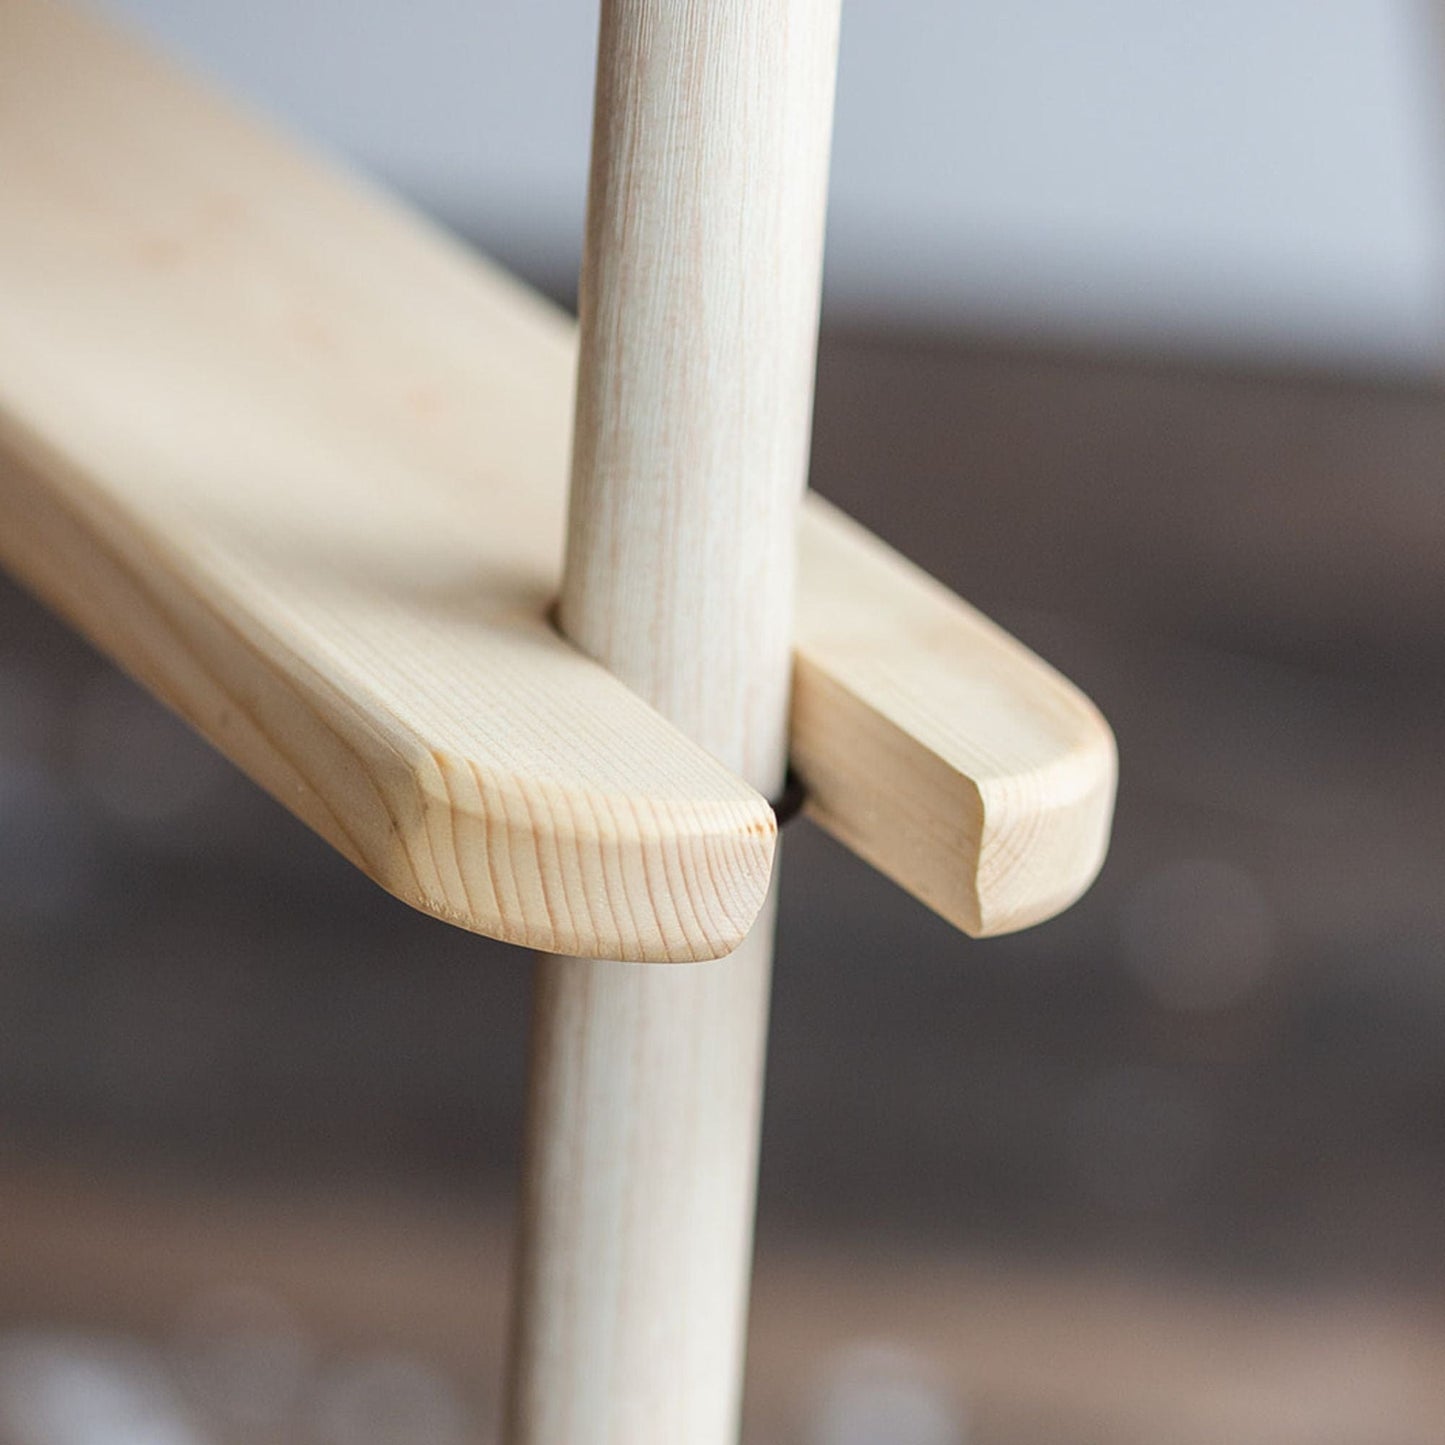 O-Rings for the IKEA highchair footrest - shown in Pine timber